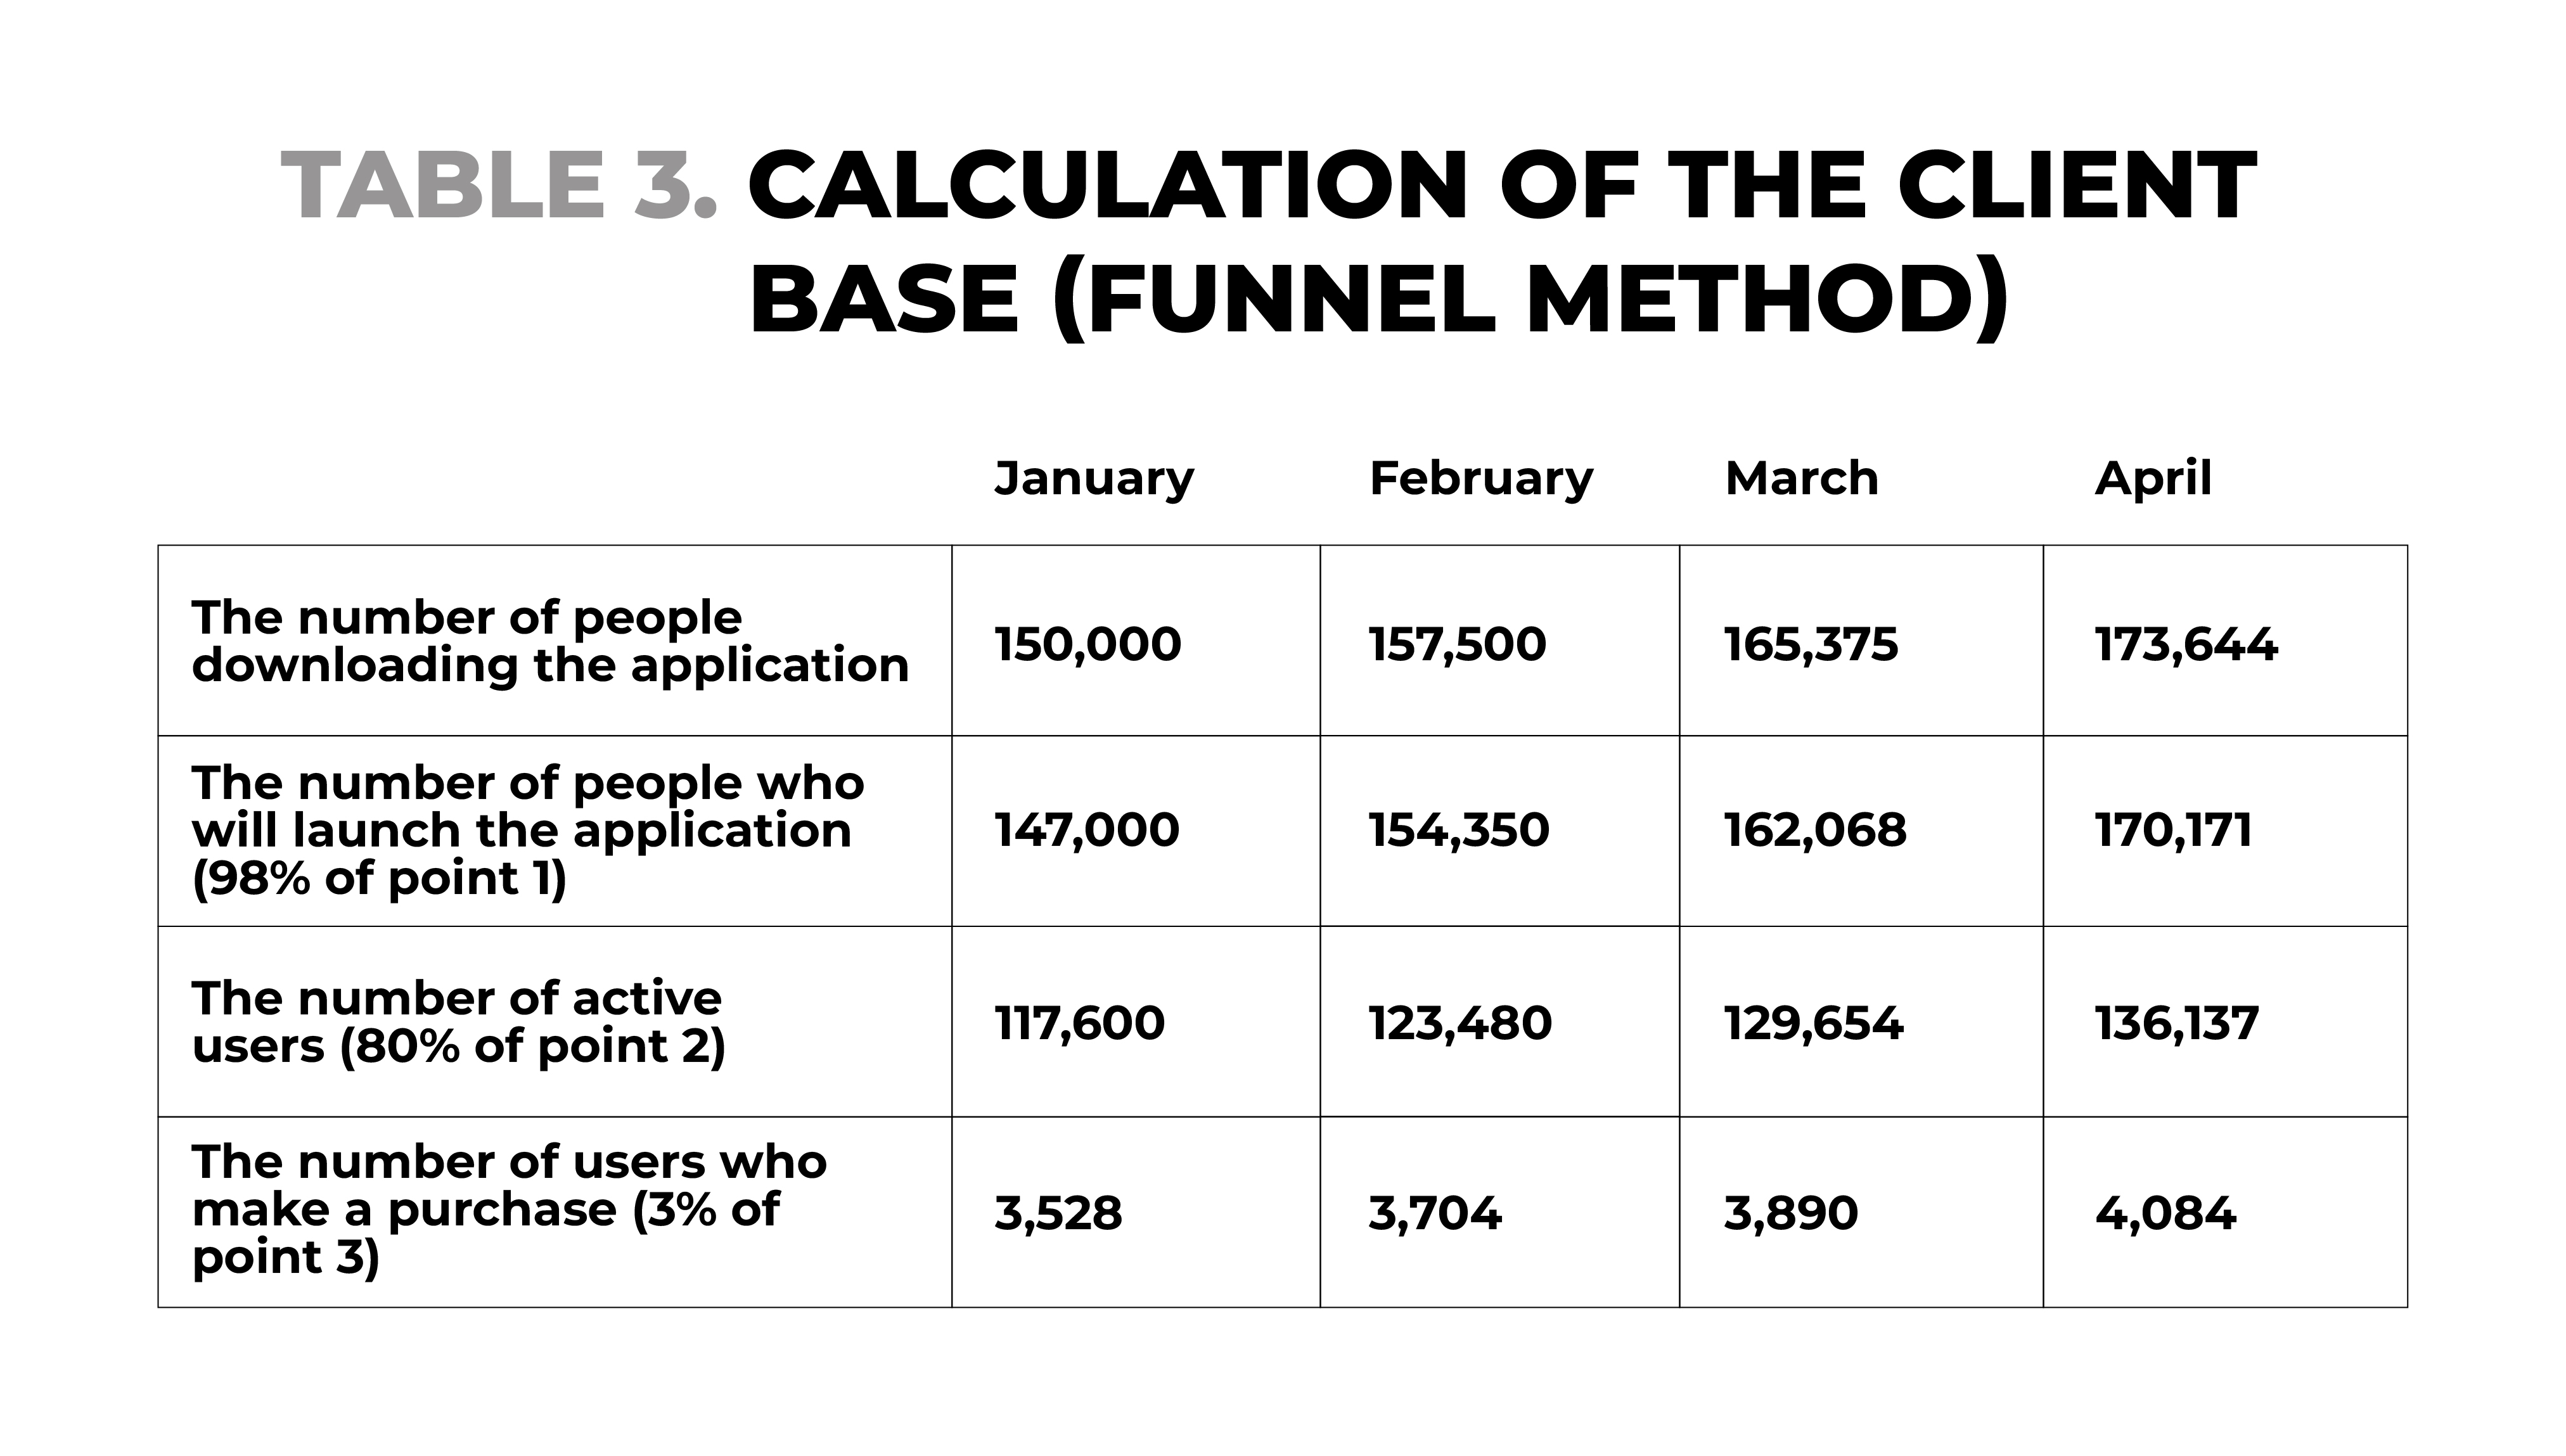 Table 3. Calculation of the client base (funnel method)